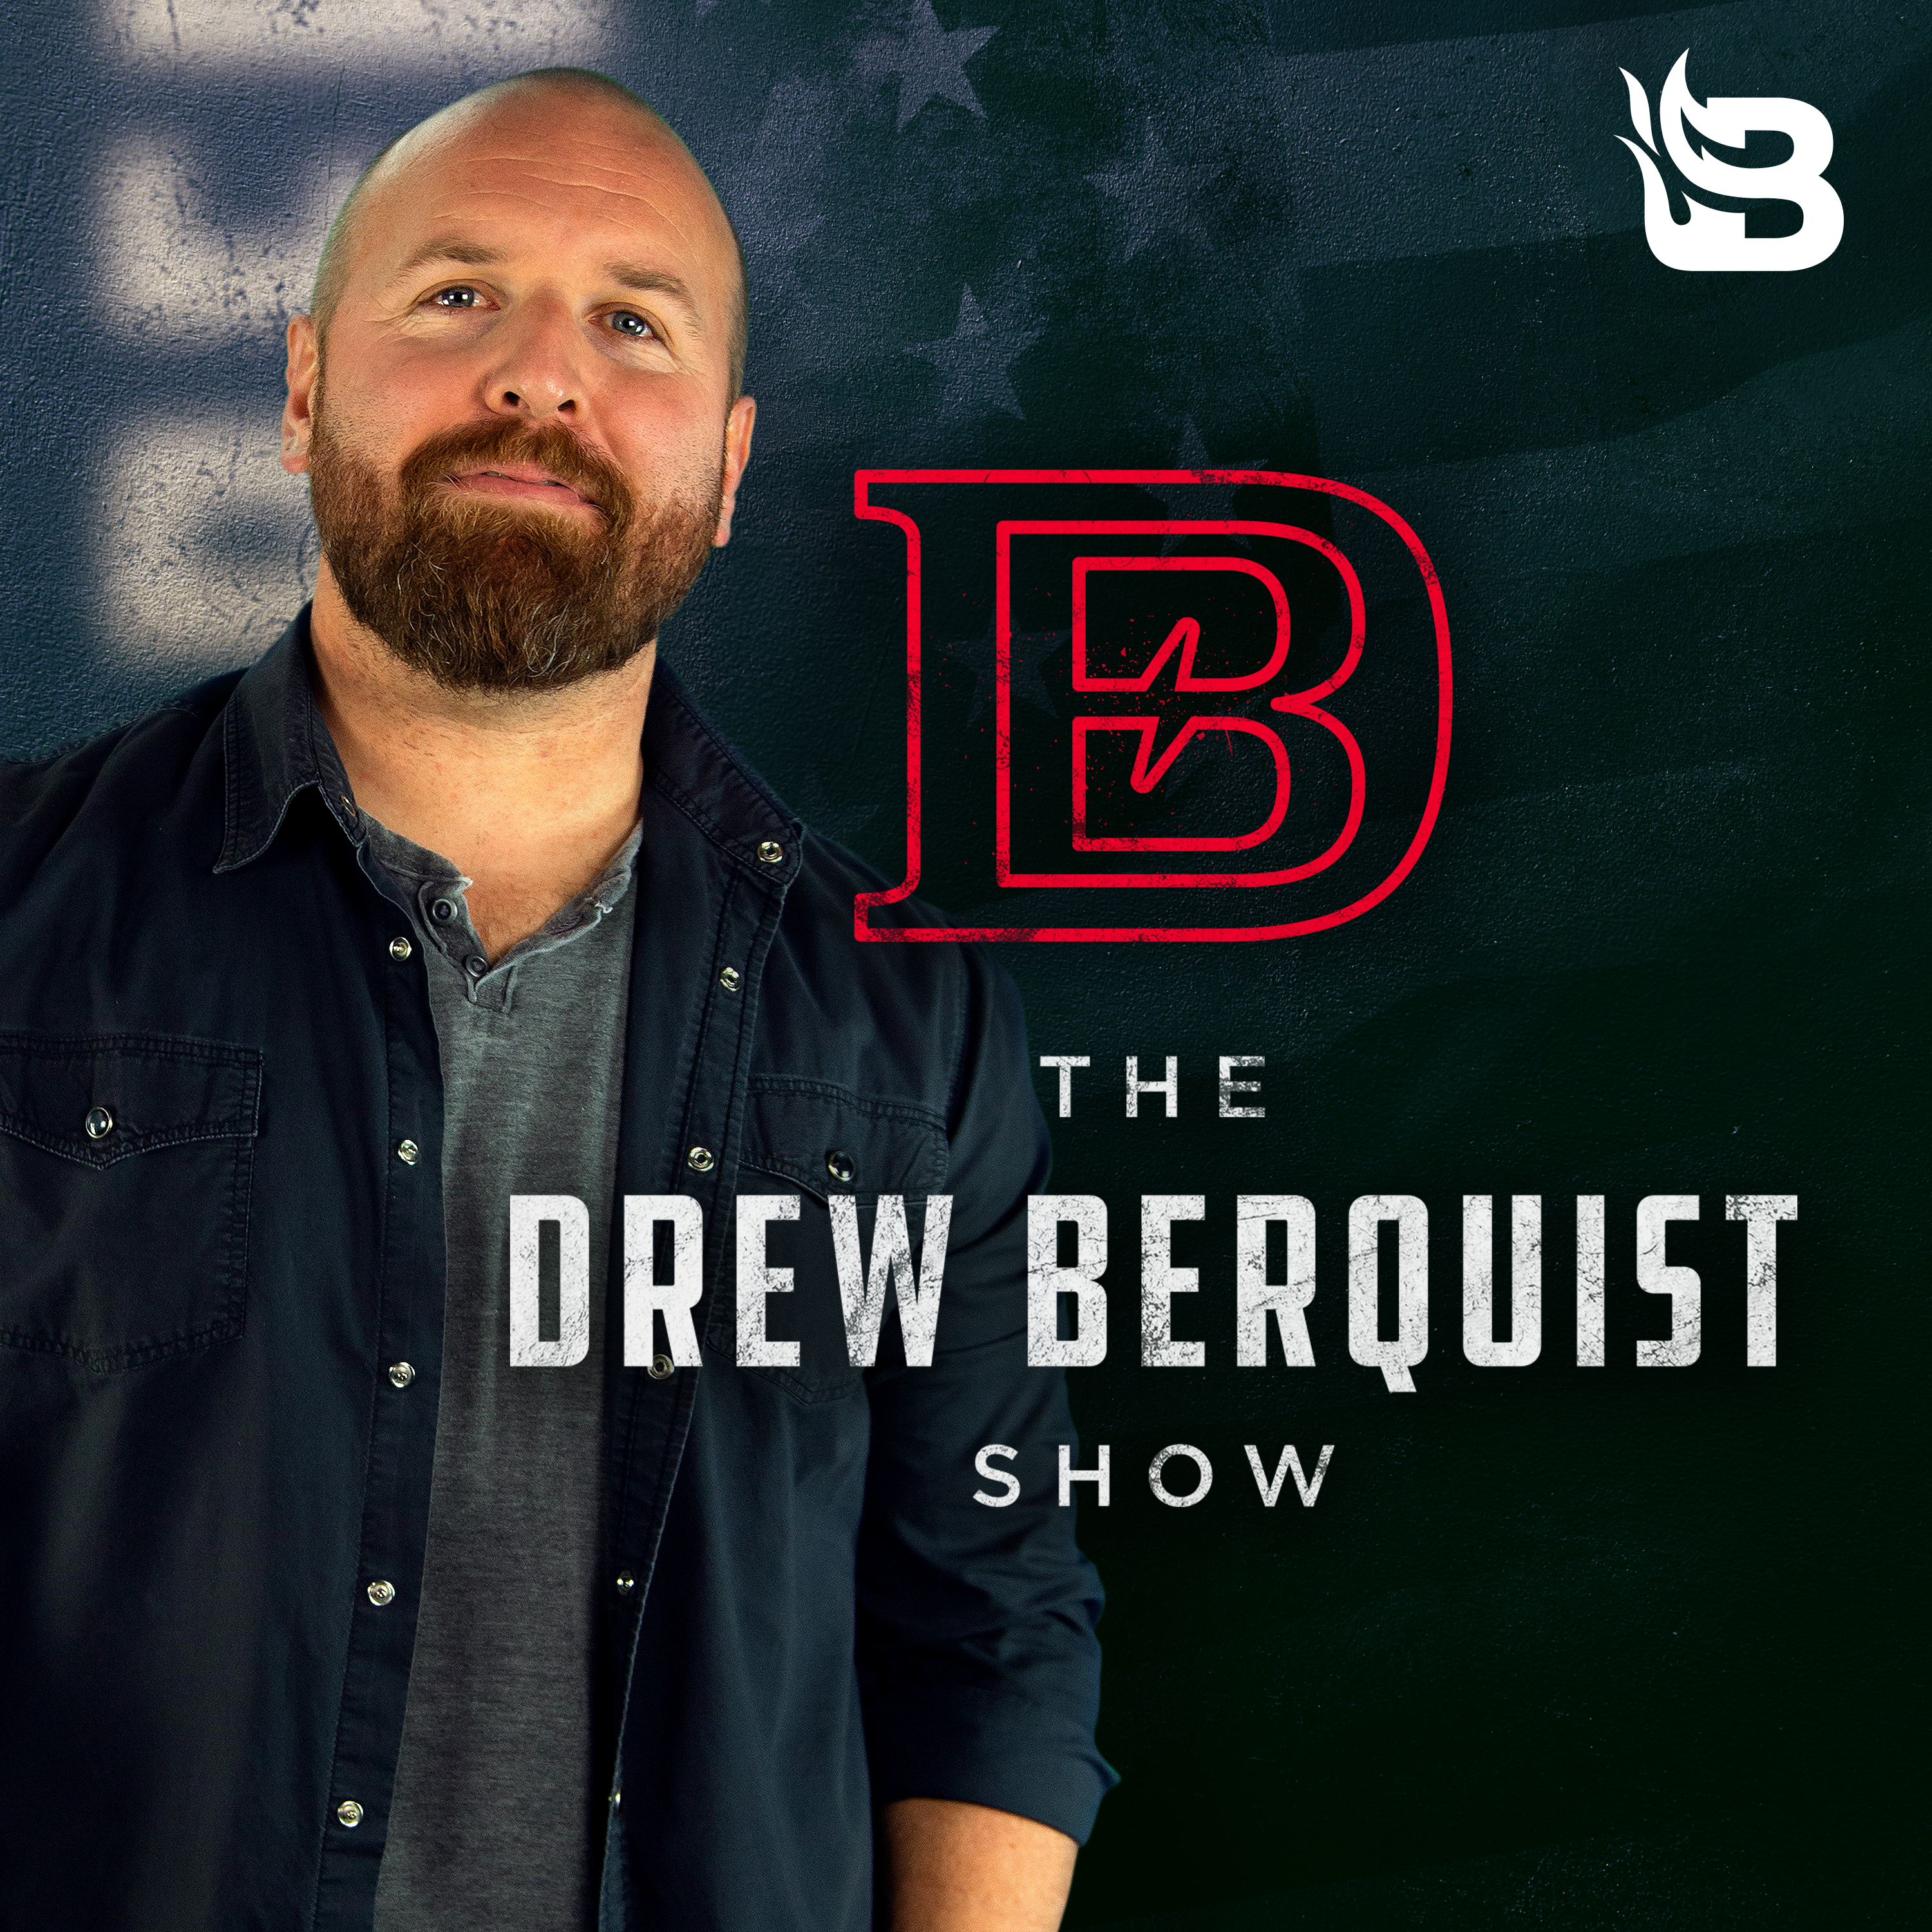 Ep 140 | House Passes Diluted Resolution on Hate Speech | The Drew Berquist Show